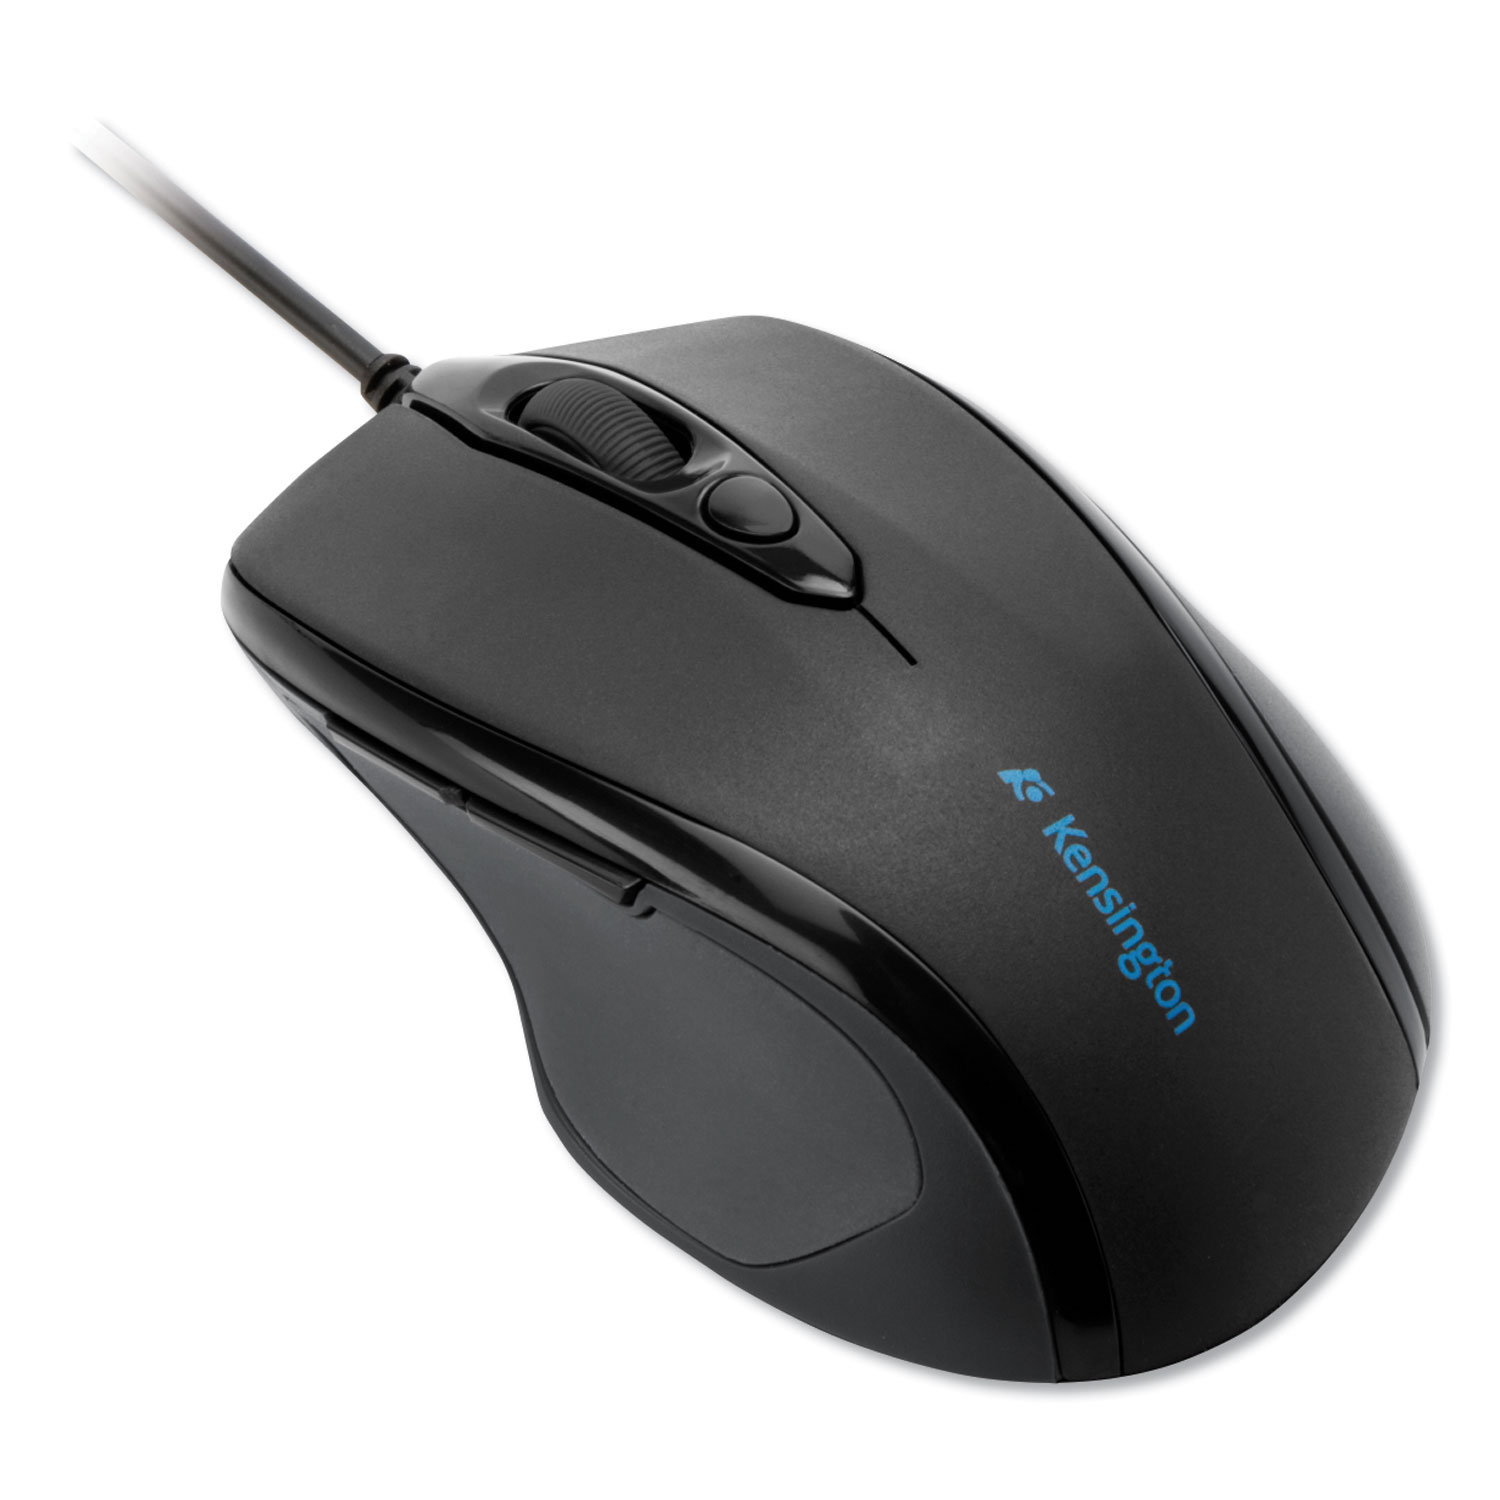  Kensington K72355US Pro Fit Wired Mid-Size Mouse, USB 2.0, Right Hand Use, Black (KMW72355) 